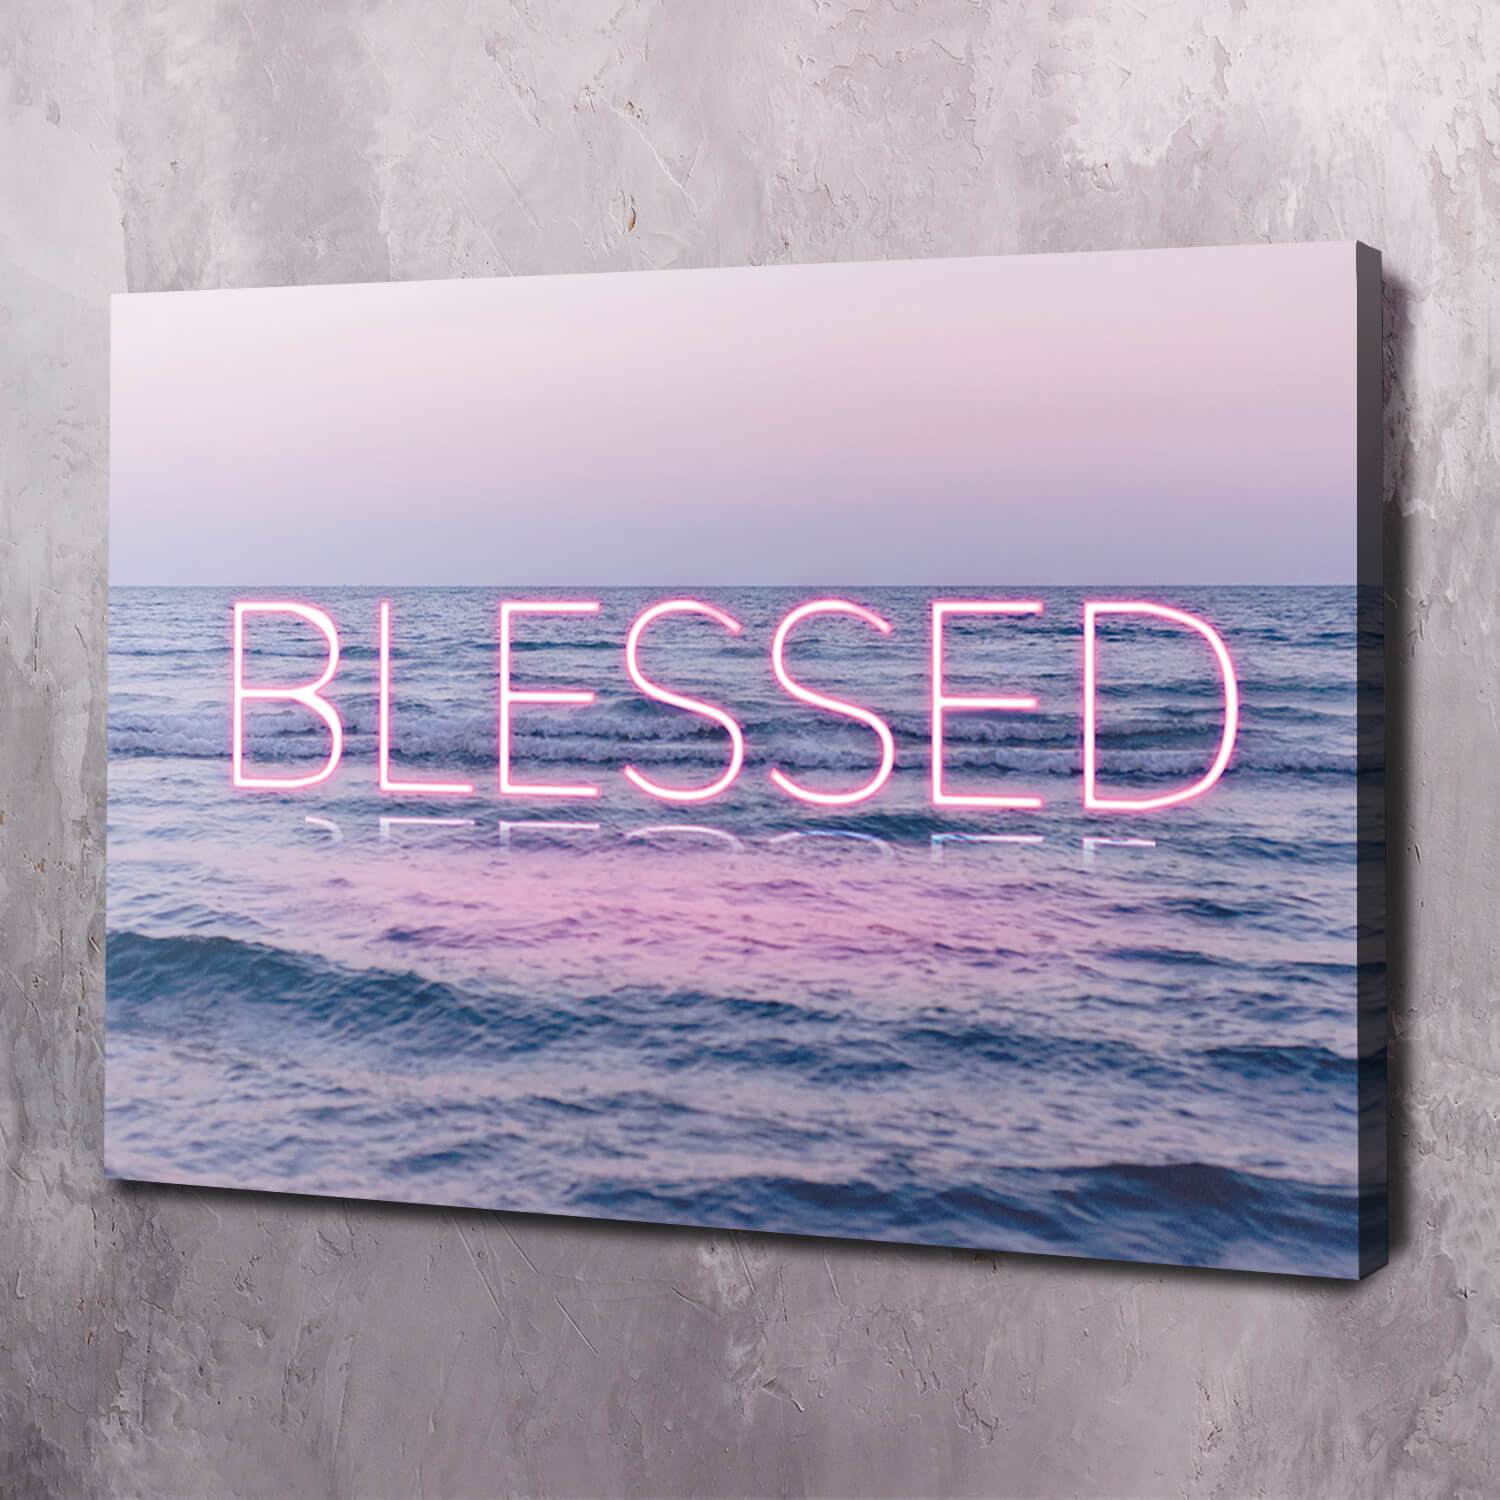 Neon Water - BLESSED Wall Art | Inspirational Wall Art Motivational Wall Art Quotes Office Art | ImpaktMaker Exclusive Canvas Art Landscape